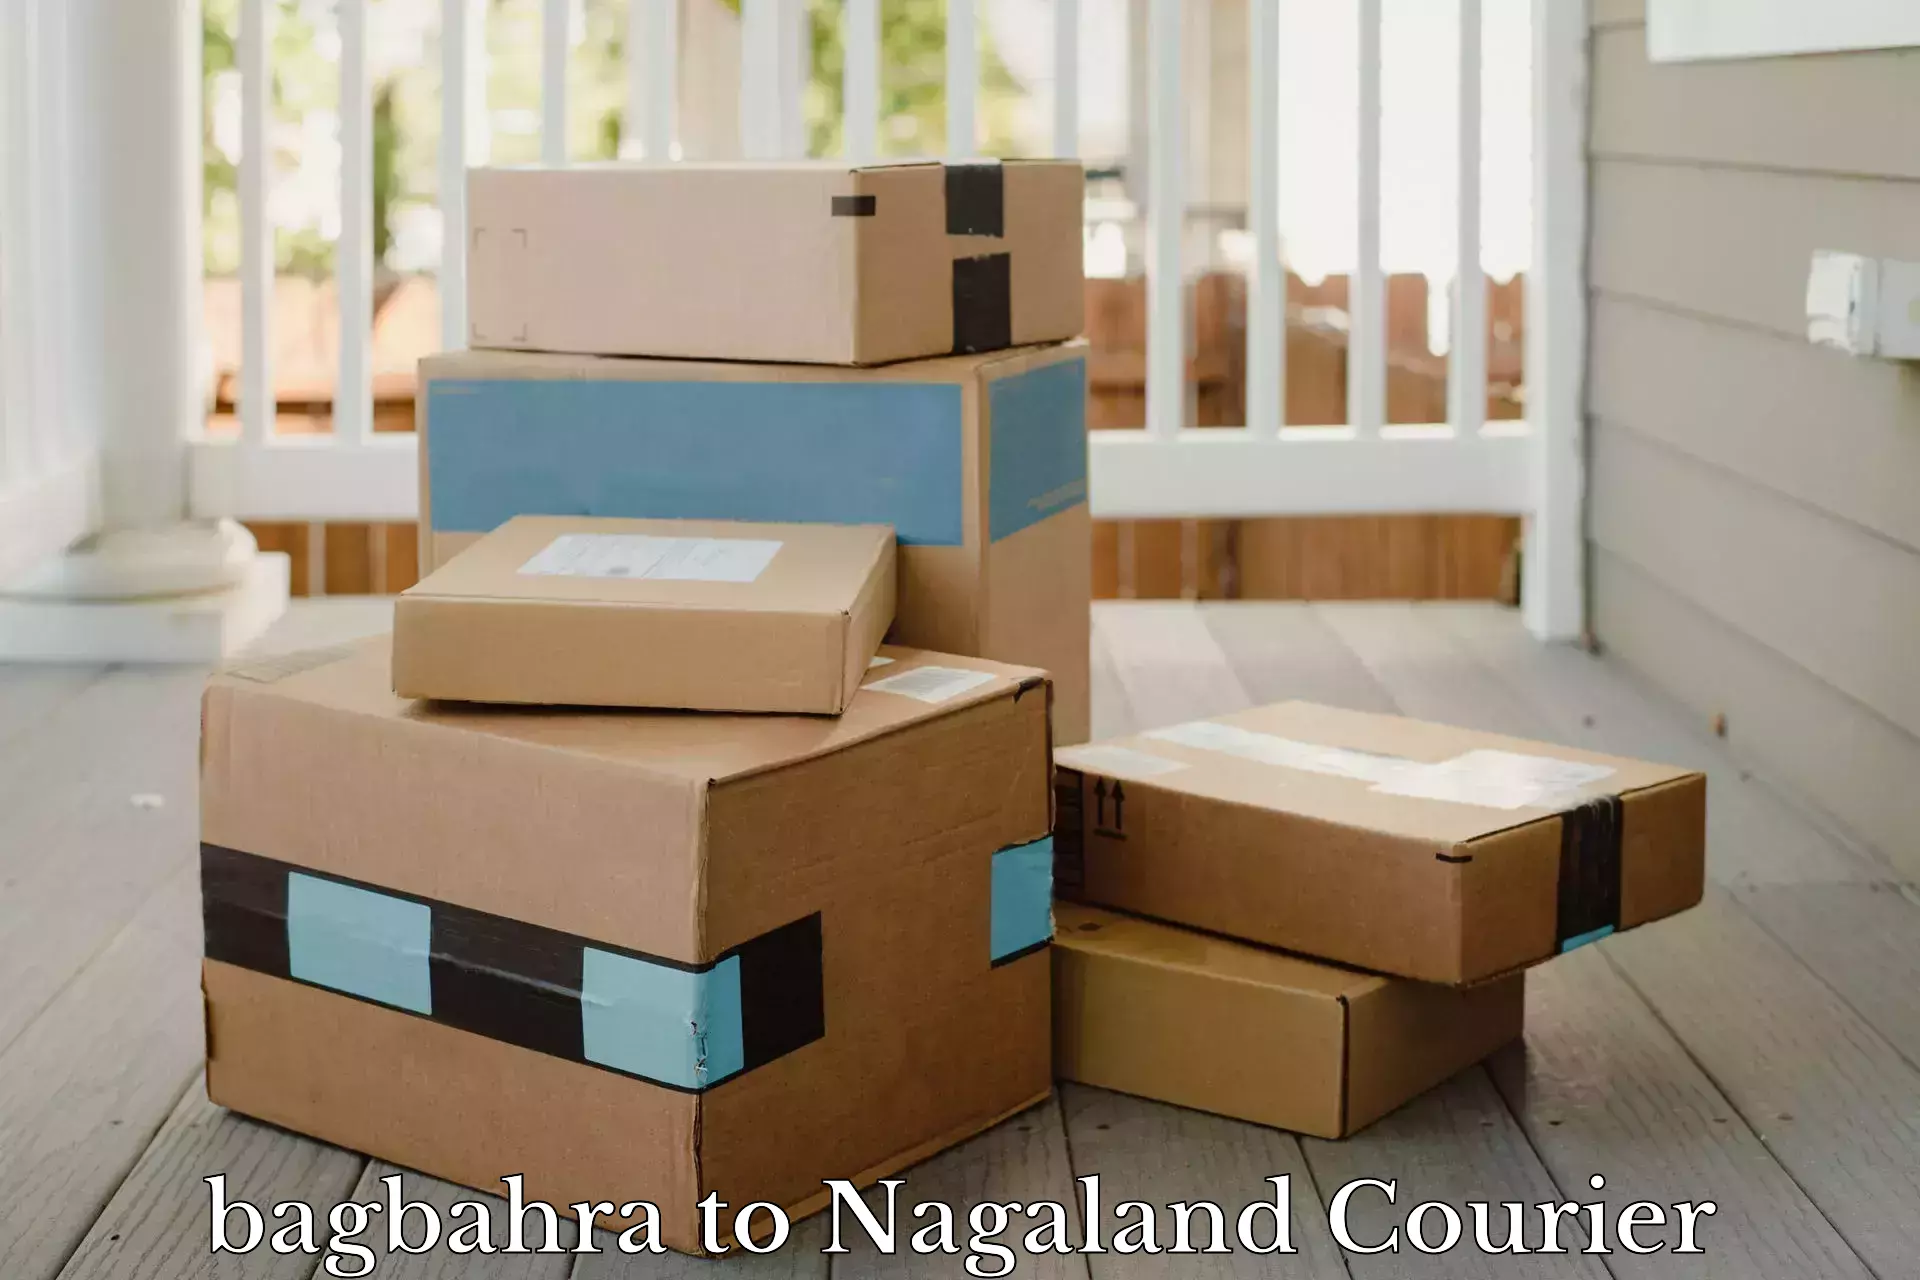 Domestic courier bagbahra to Dimapur